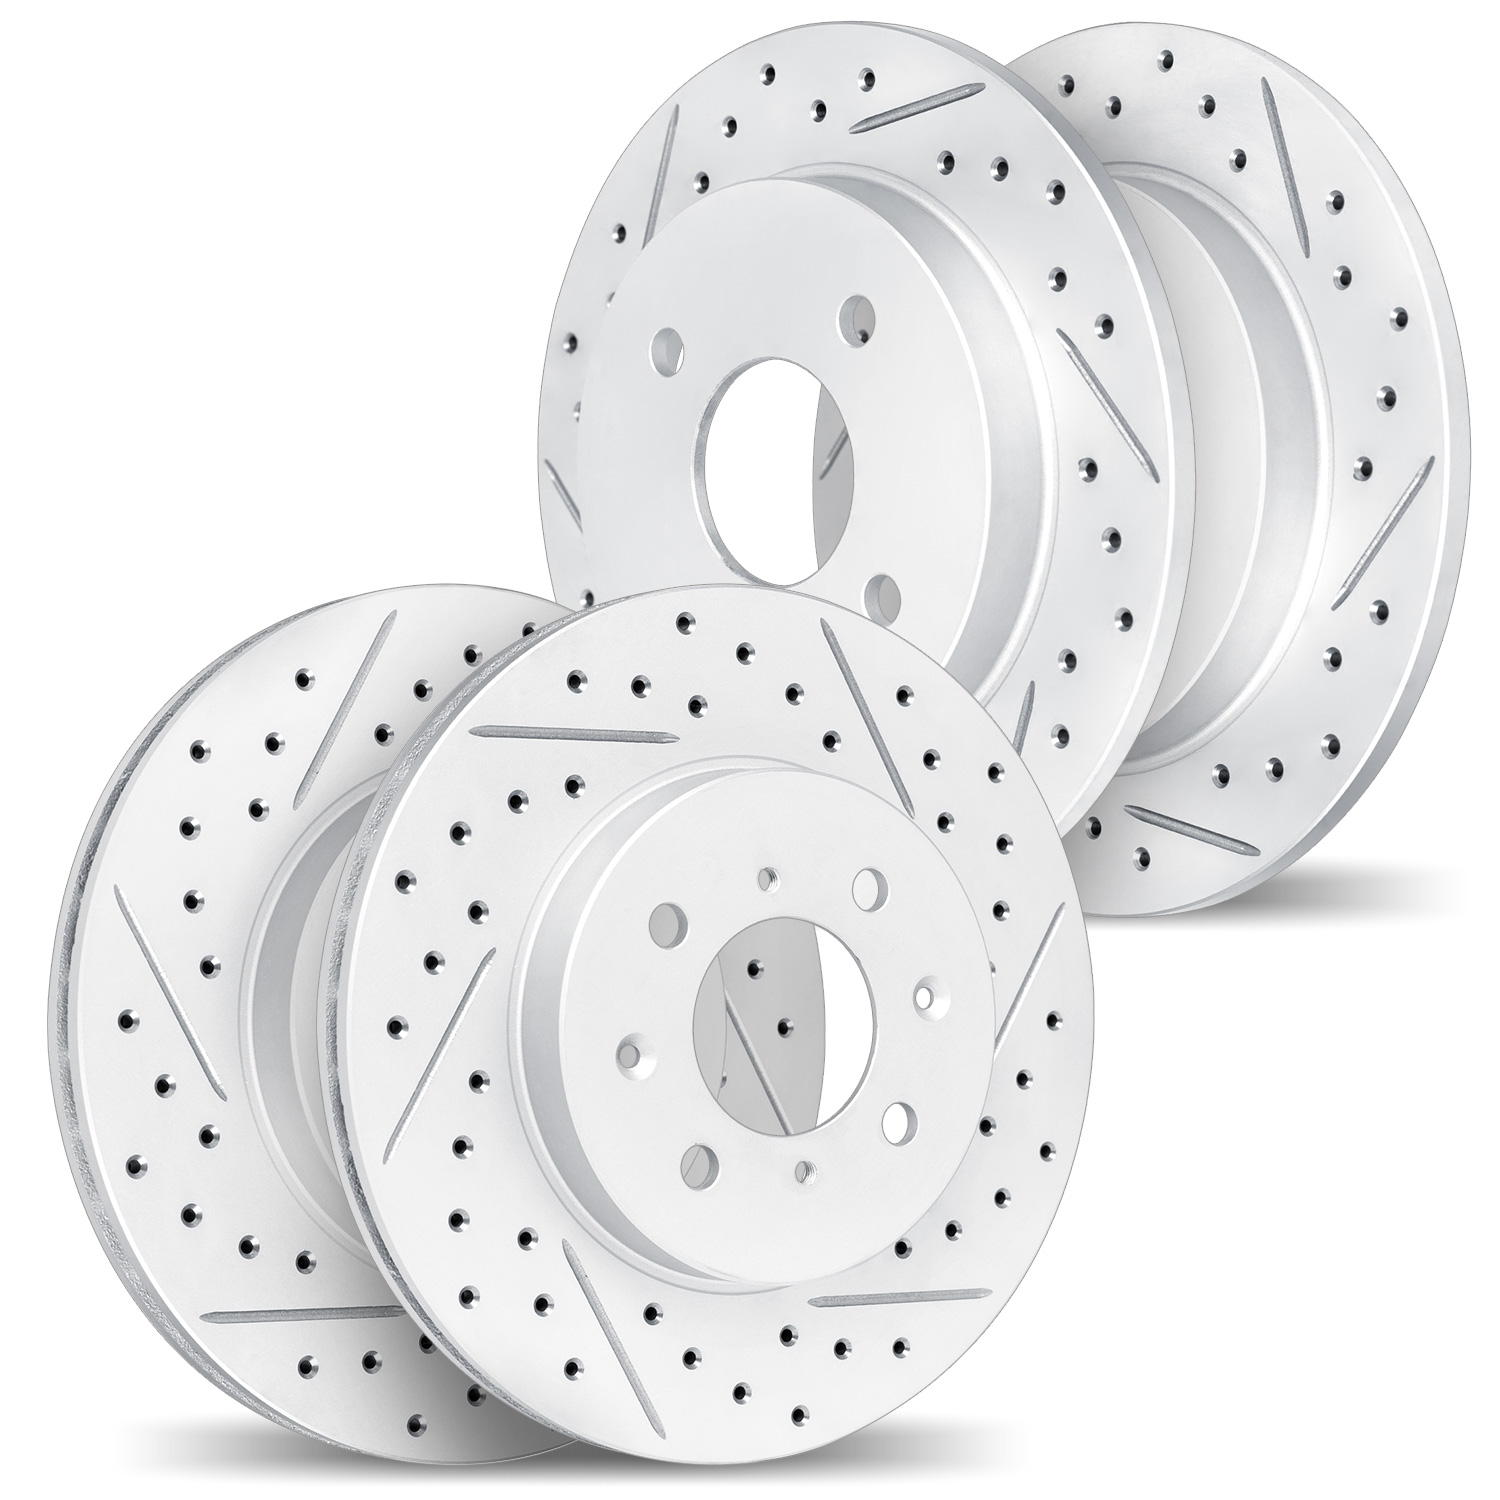 2004-80031 Geoperformance Drilled/Slotted Brake Rotors, 2001-2005 Ford/Lincoln/Mercury/Mazda, Position: Front and Rear